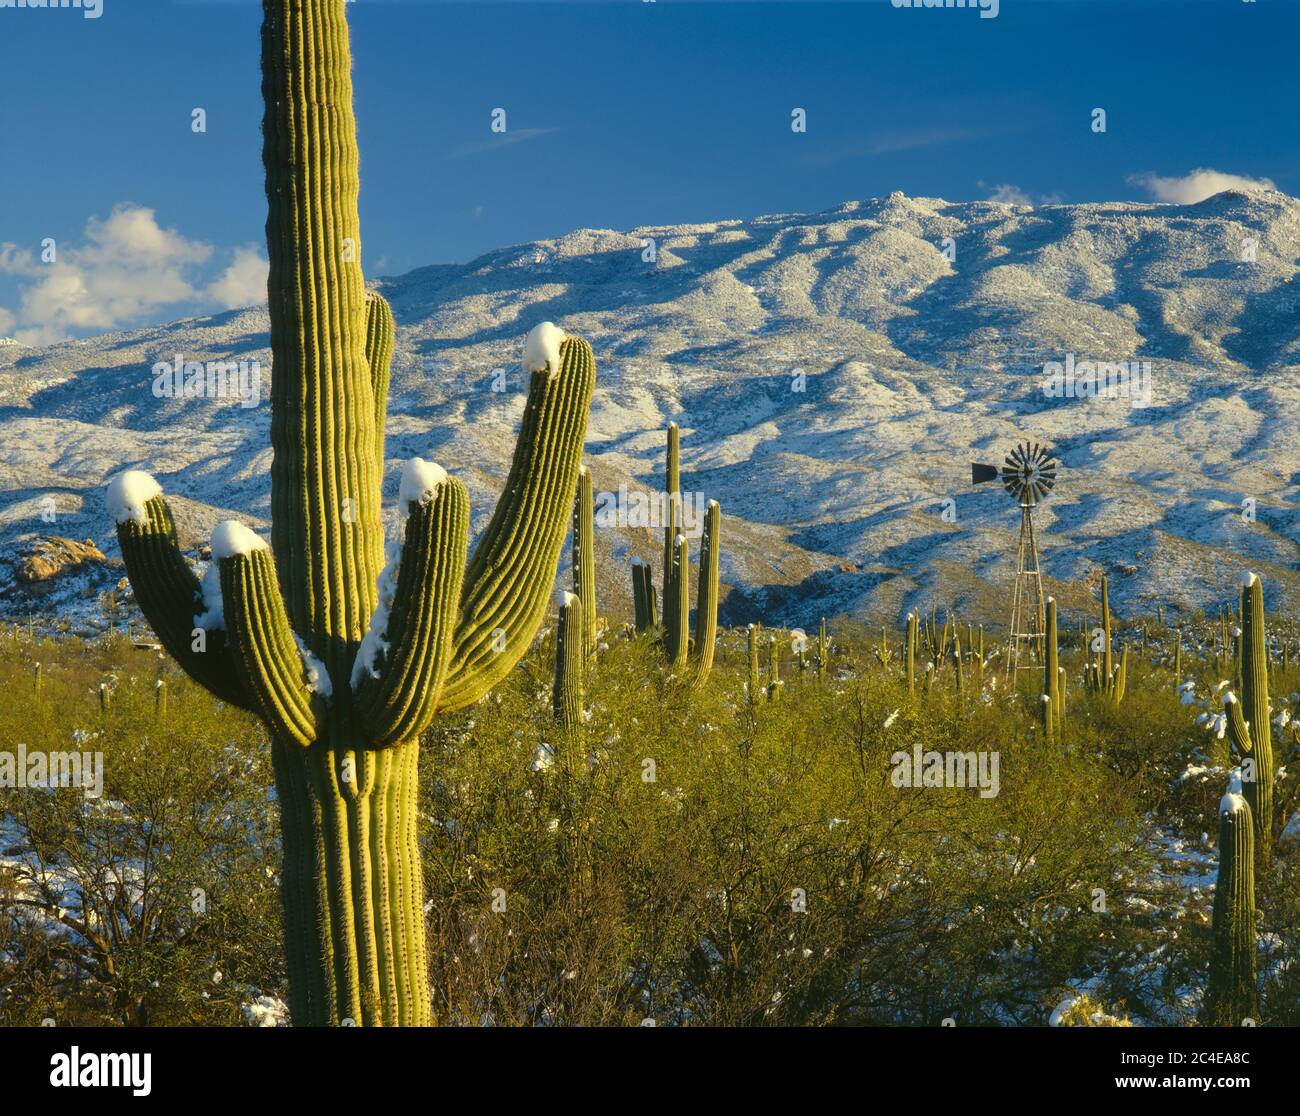 Tucson  AZ / DEC Afternoon light warms a snowcapped Saguaro cactus in foreground backdropped by a windmill and snow blanketed Rincon mountains. Stock Photo